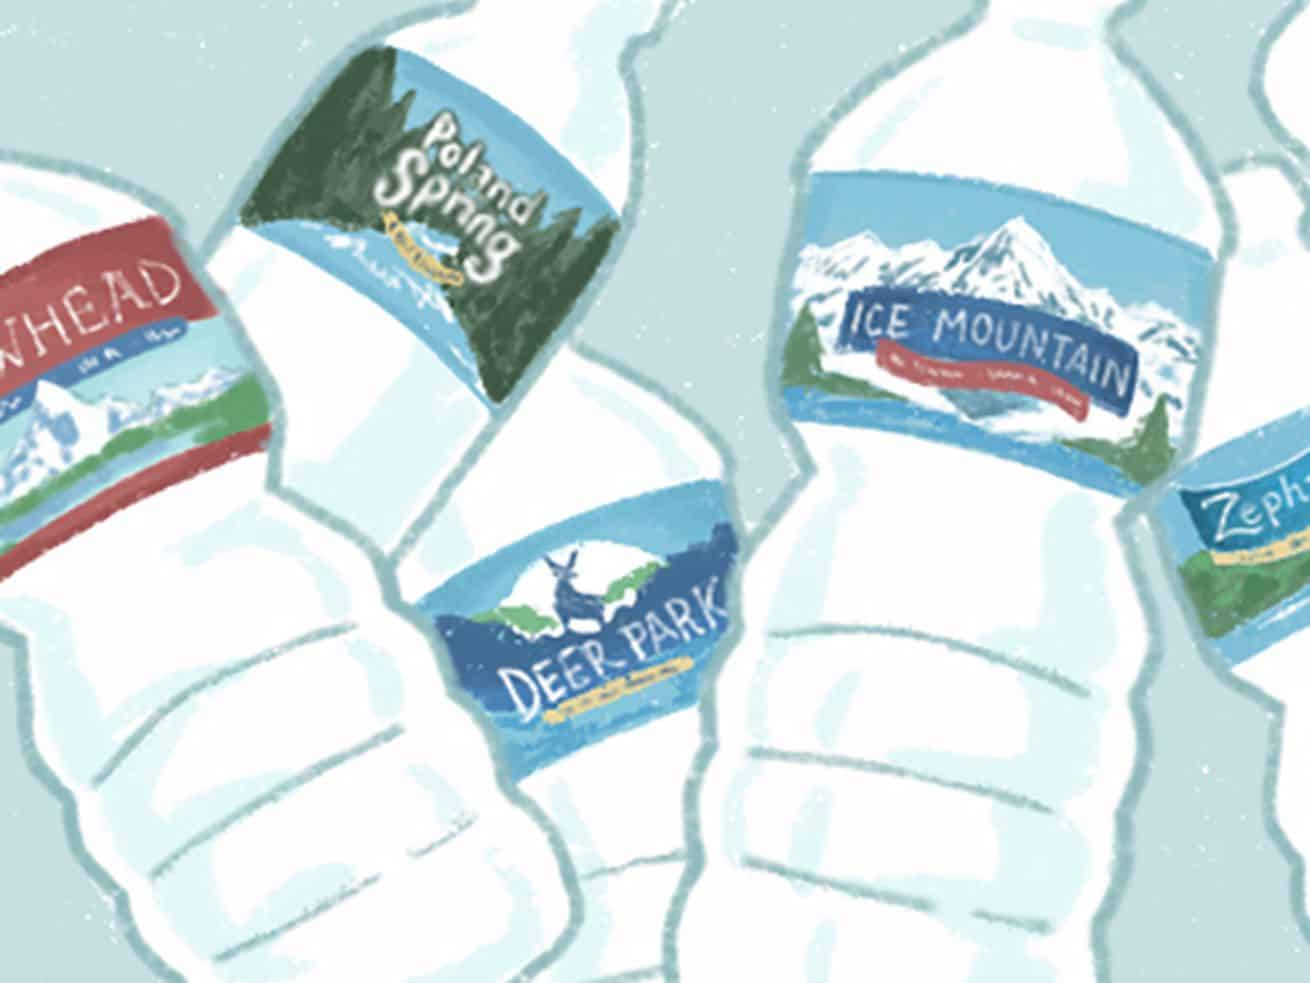 The spiritual bankruptcy of bottled water